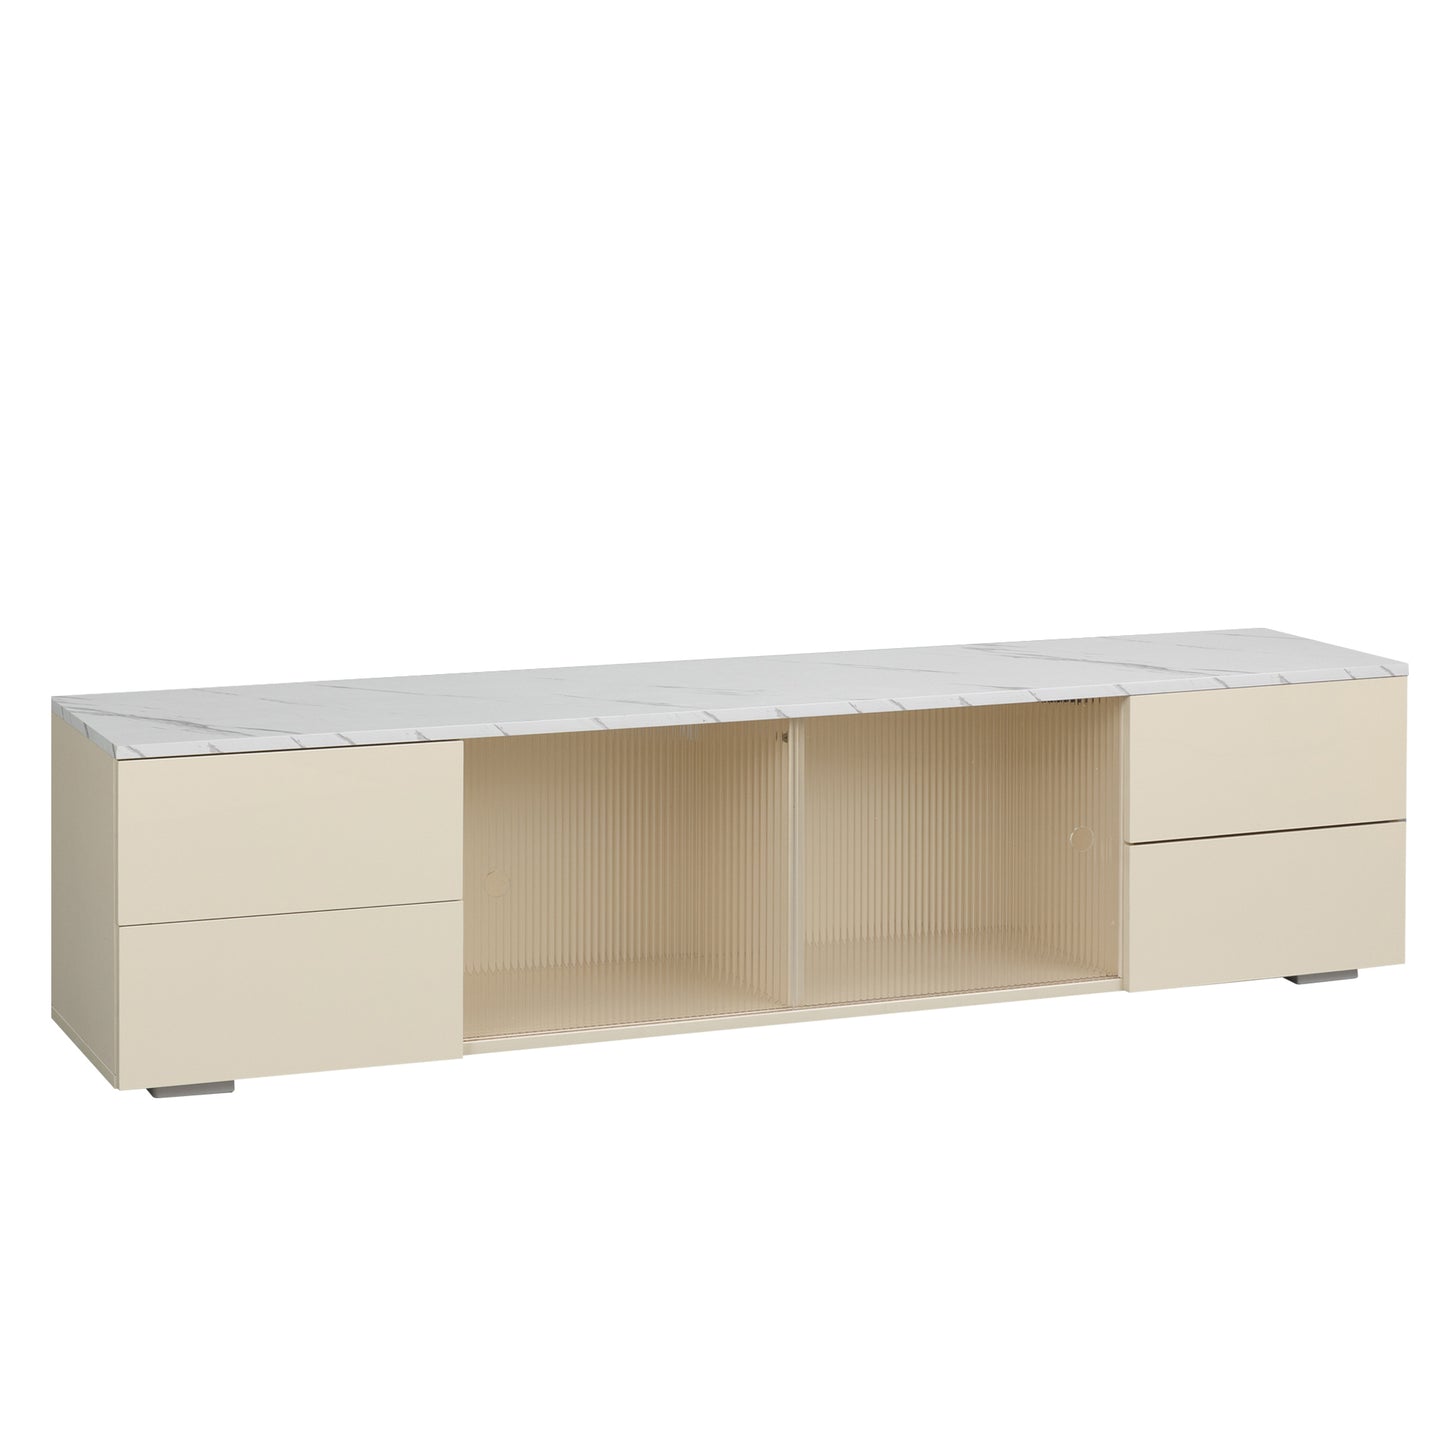 TV stand,TVCabinet,entertainment center,TV console,media console,with LED remote control lights,roof gravel texture,UV drawer panels,sliding doors,can be placed in the living room,bedroom,color:Beige